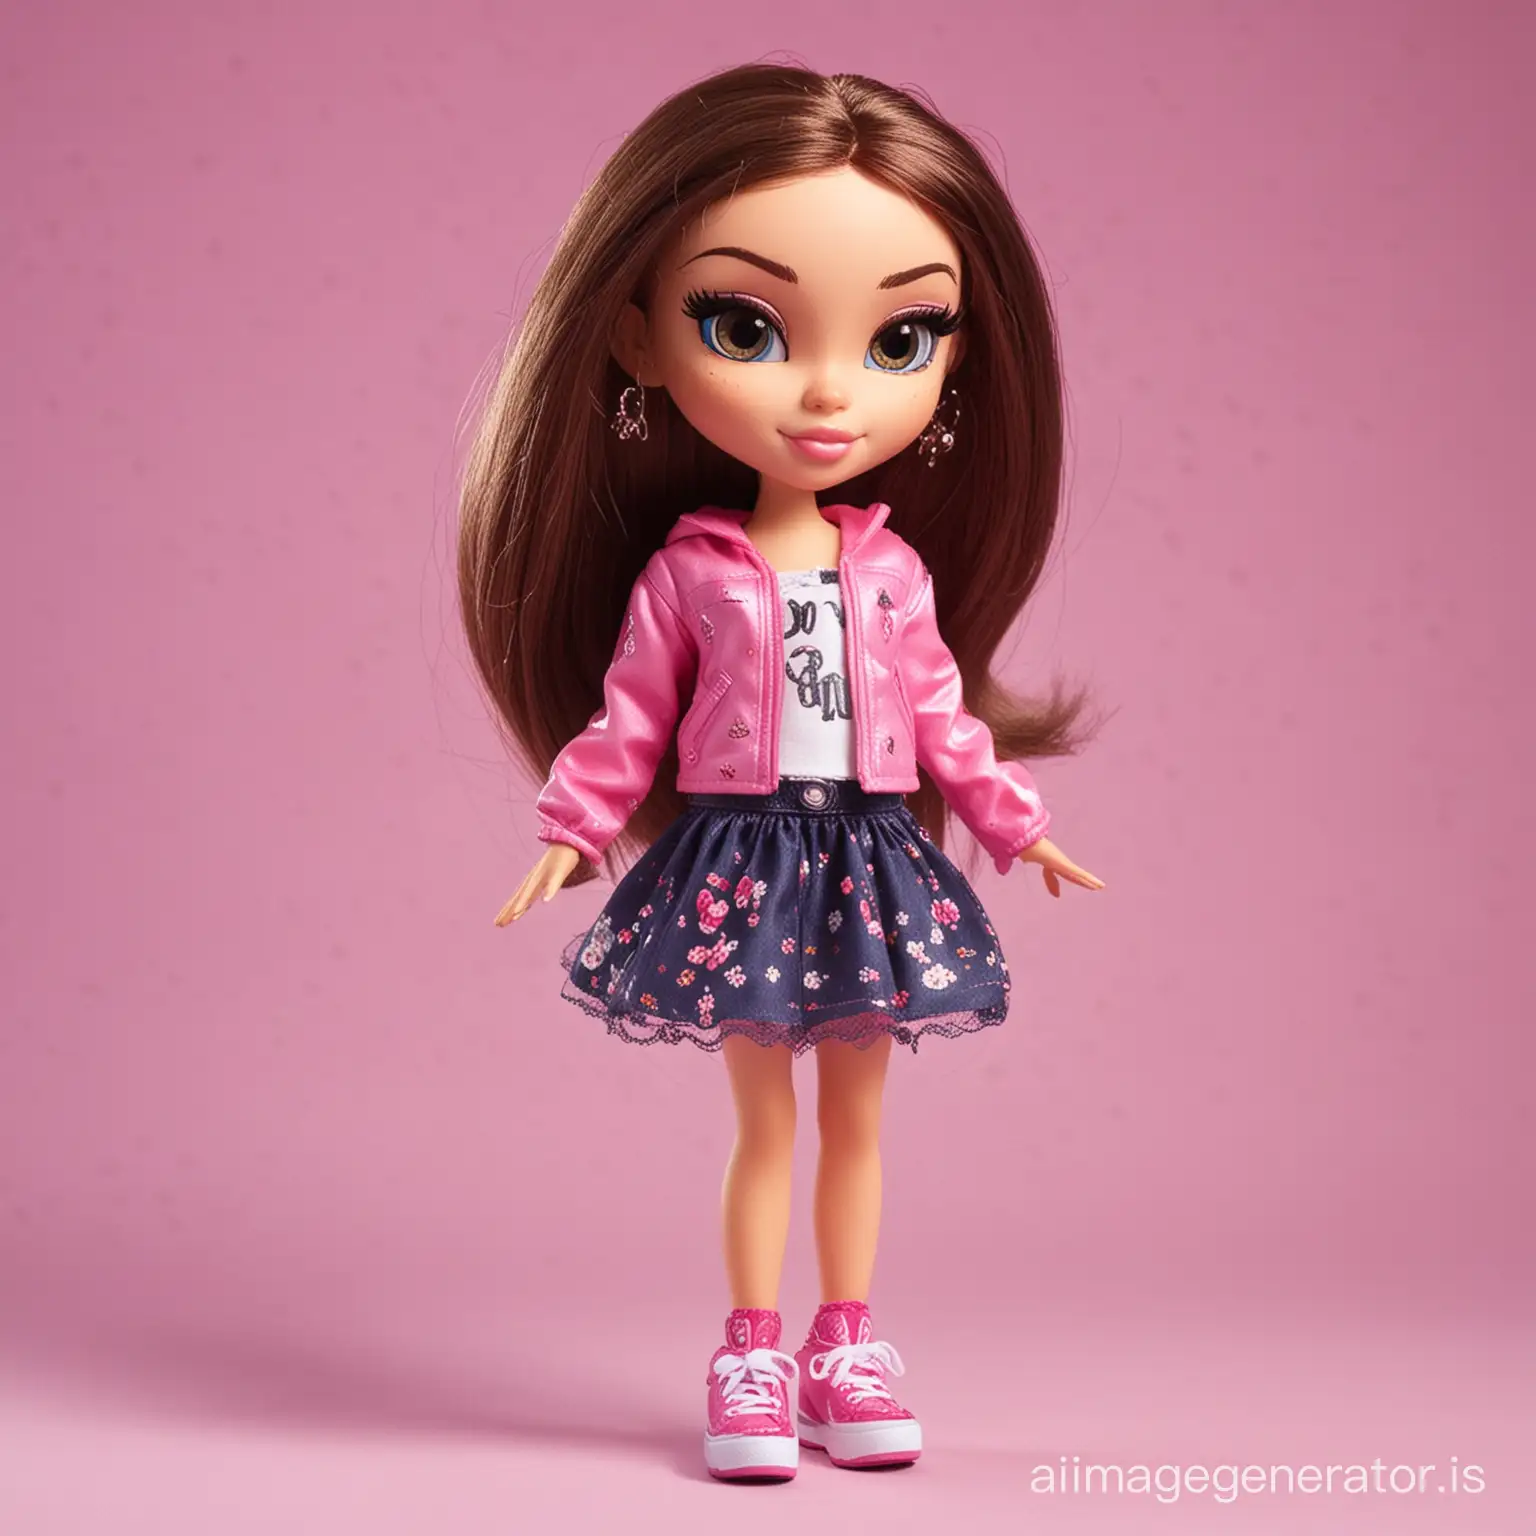 The girl in the style of bratz stands half-turned.